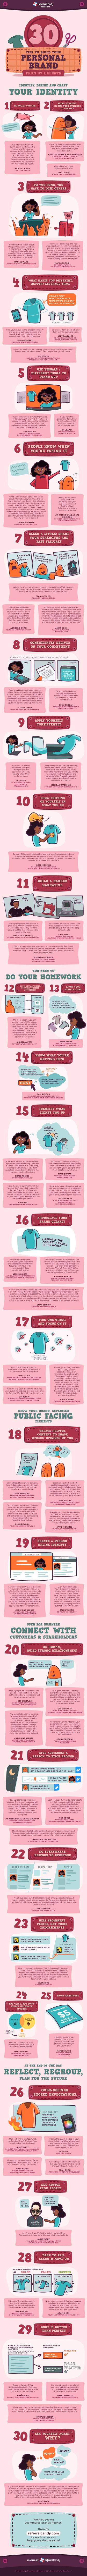 Digital-Marketing-30-Tips-To-Build-Your-Personal-Brand-From-37-Experts-infographic-Branding-M Digital Marketing : 30 Tips To Build Your Personal Brand From 37 Experts   #infographic #Branding #M...